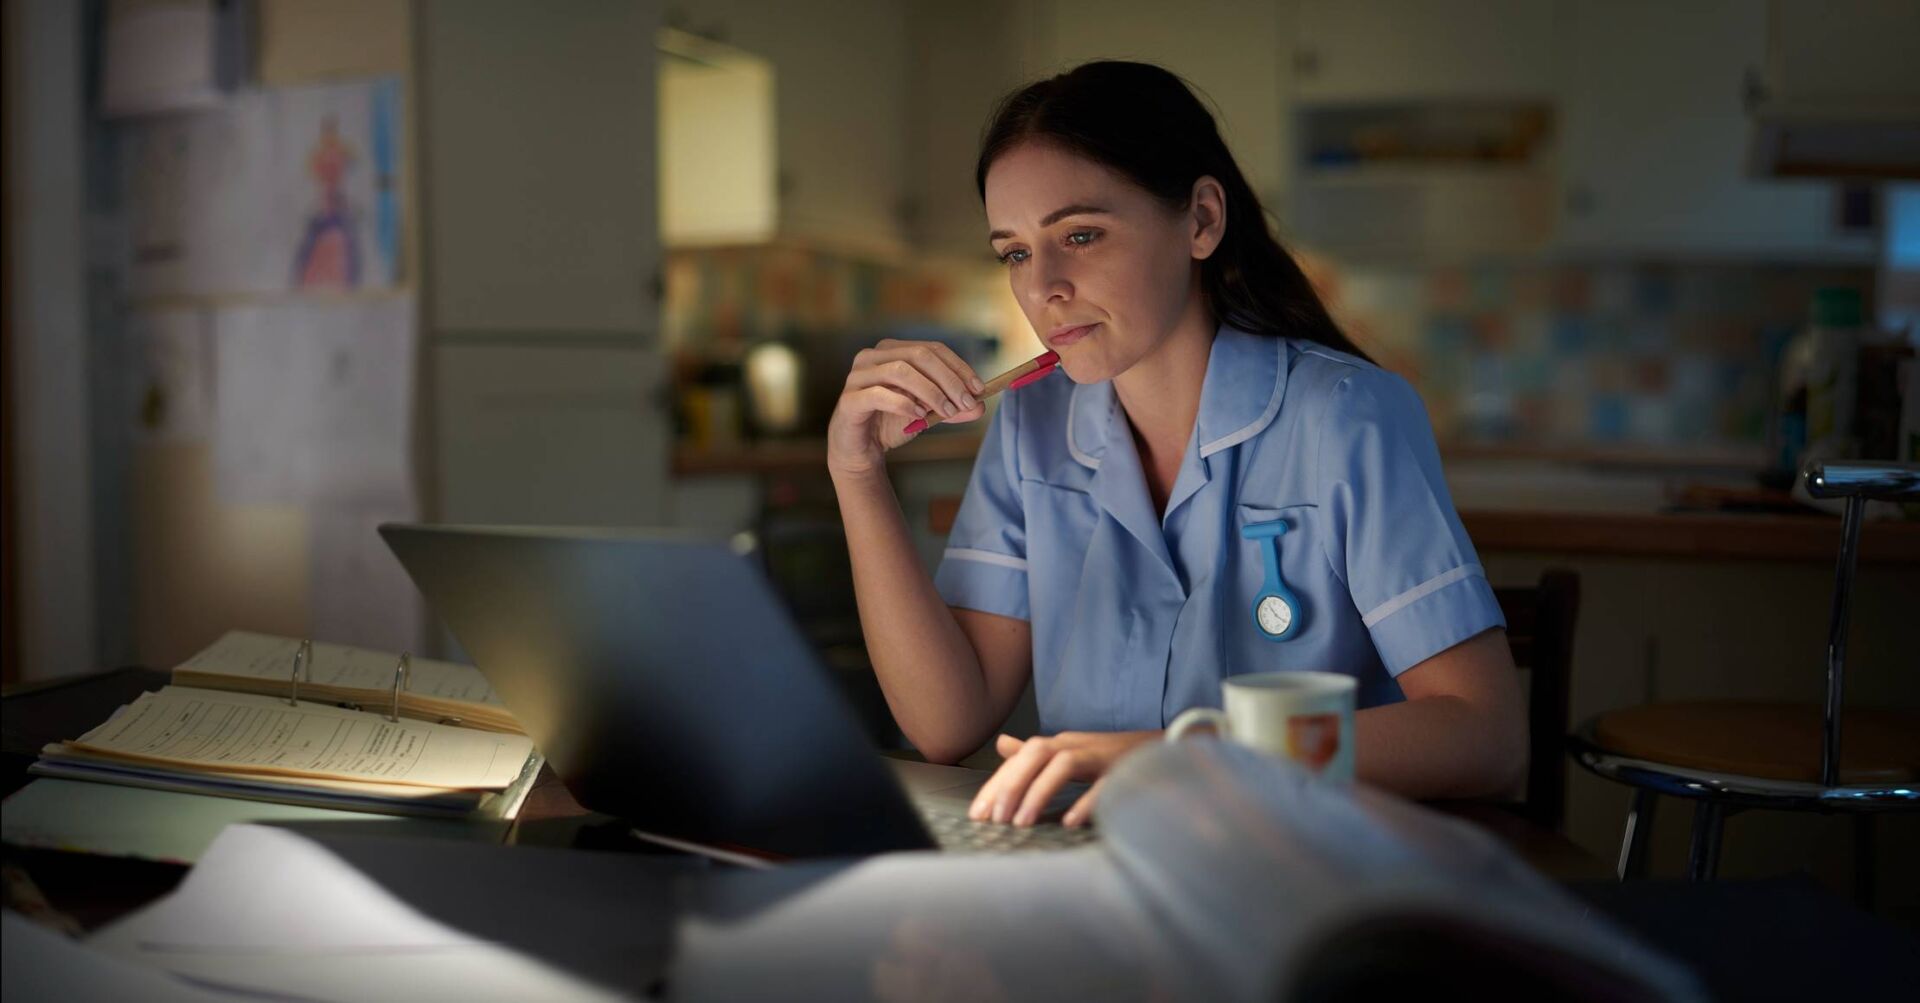 District nurses facing rising workloads with increased administrative pressures